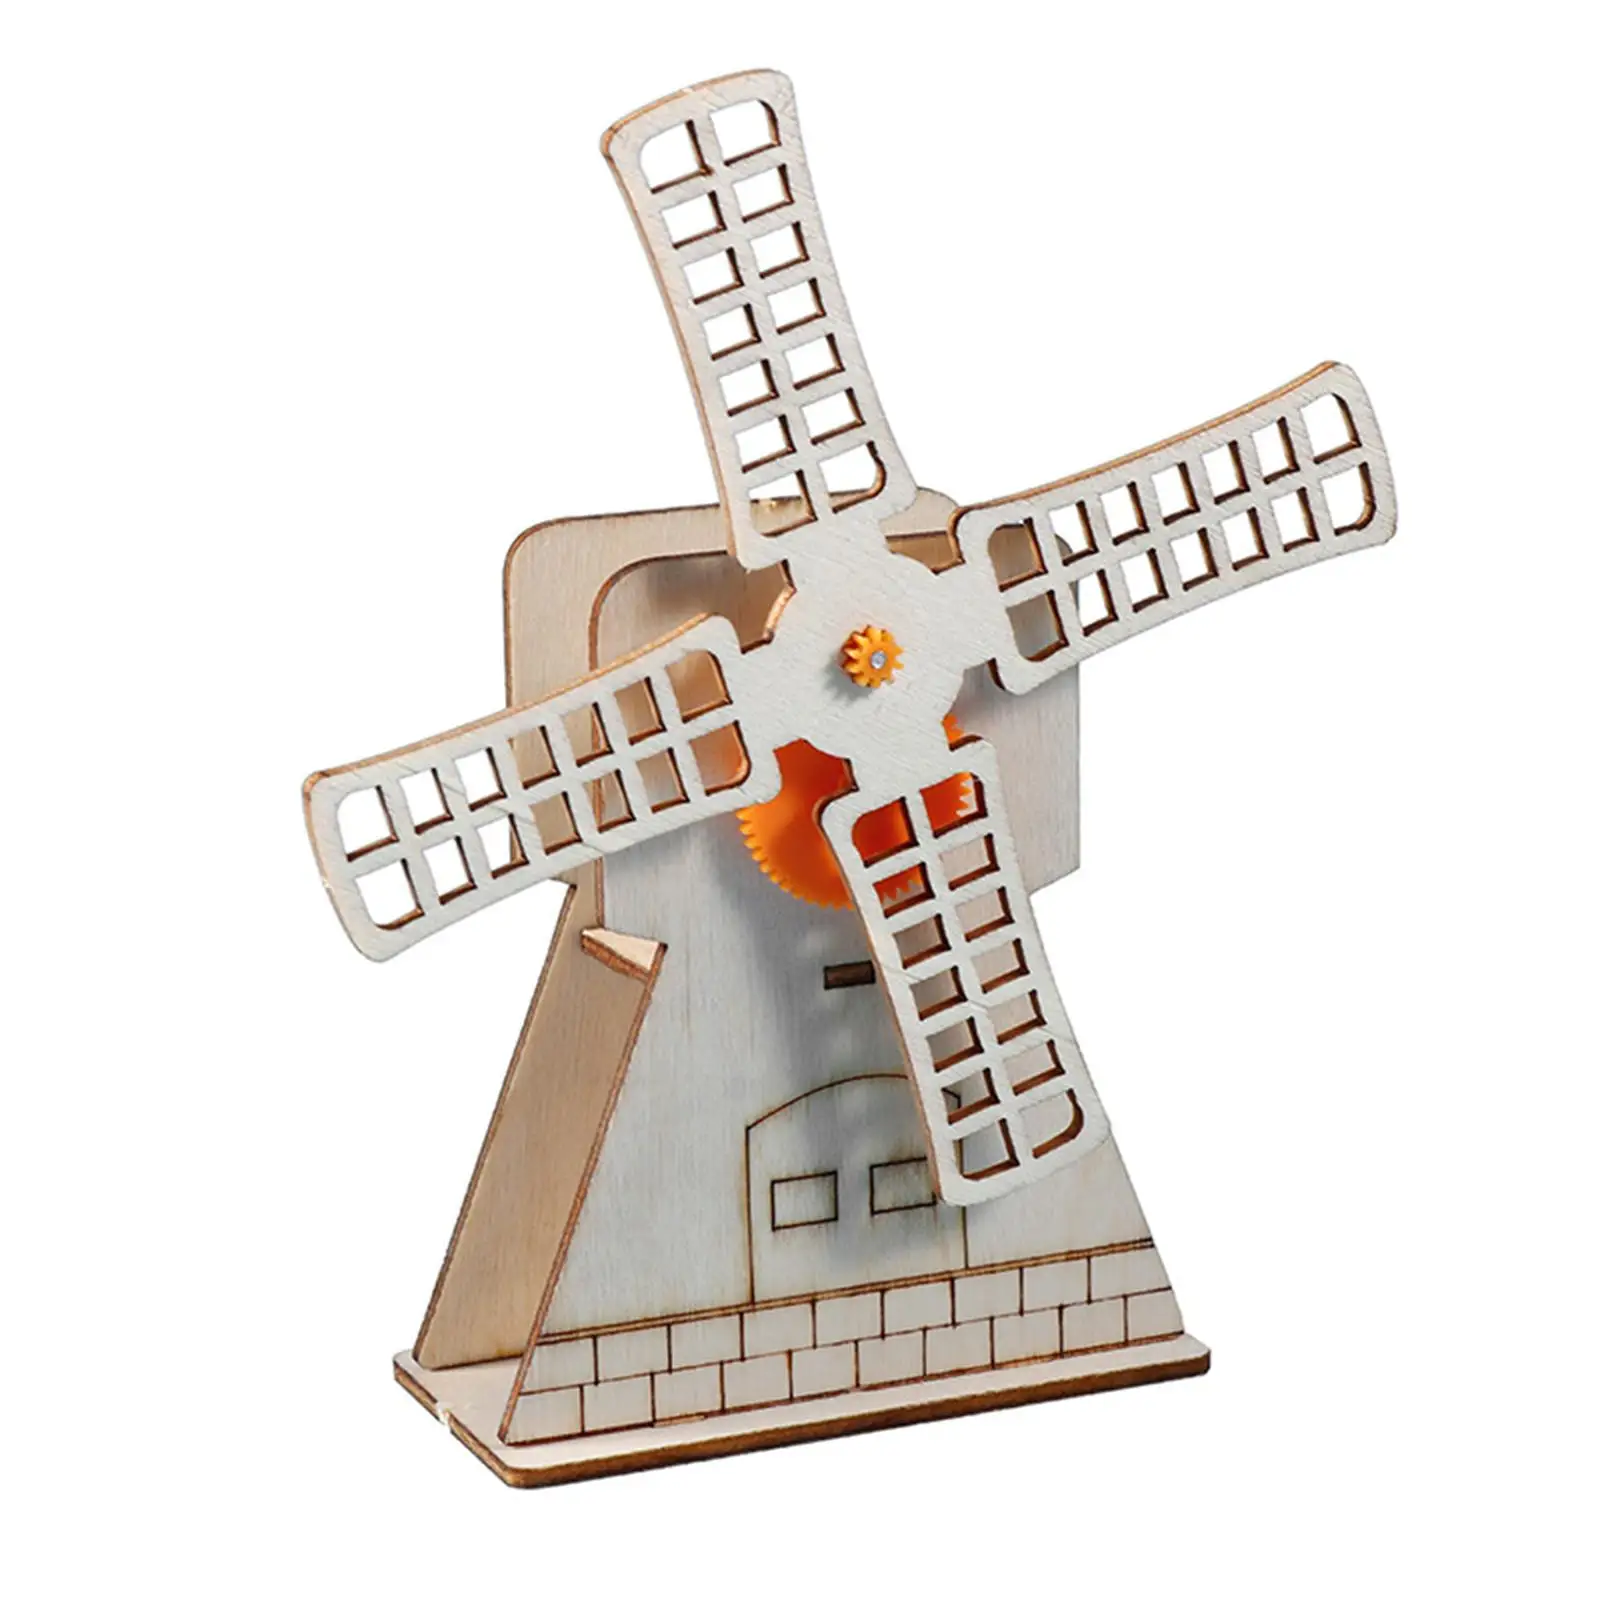 Windmill Wooden House Ornaments Science Teaching Toy Science Projects Windmill Model Kit for Children Boys Girls Birthday Gifts